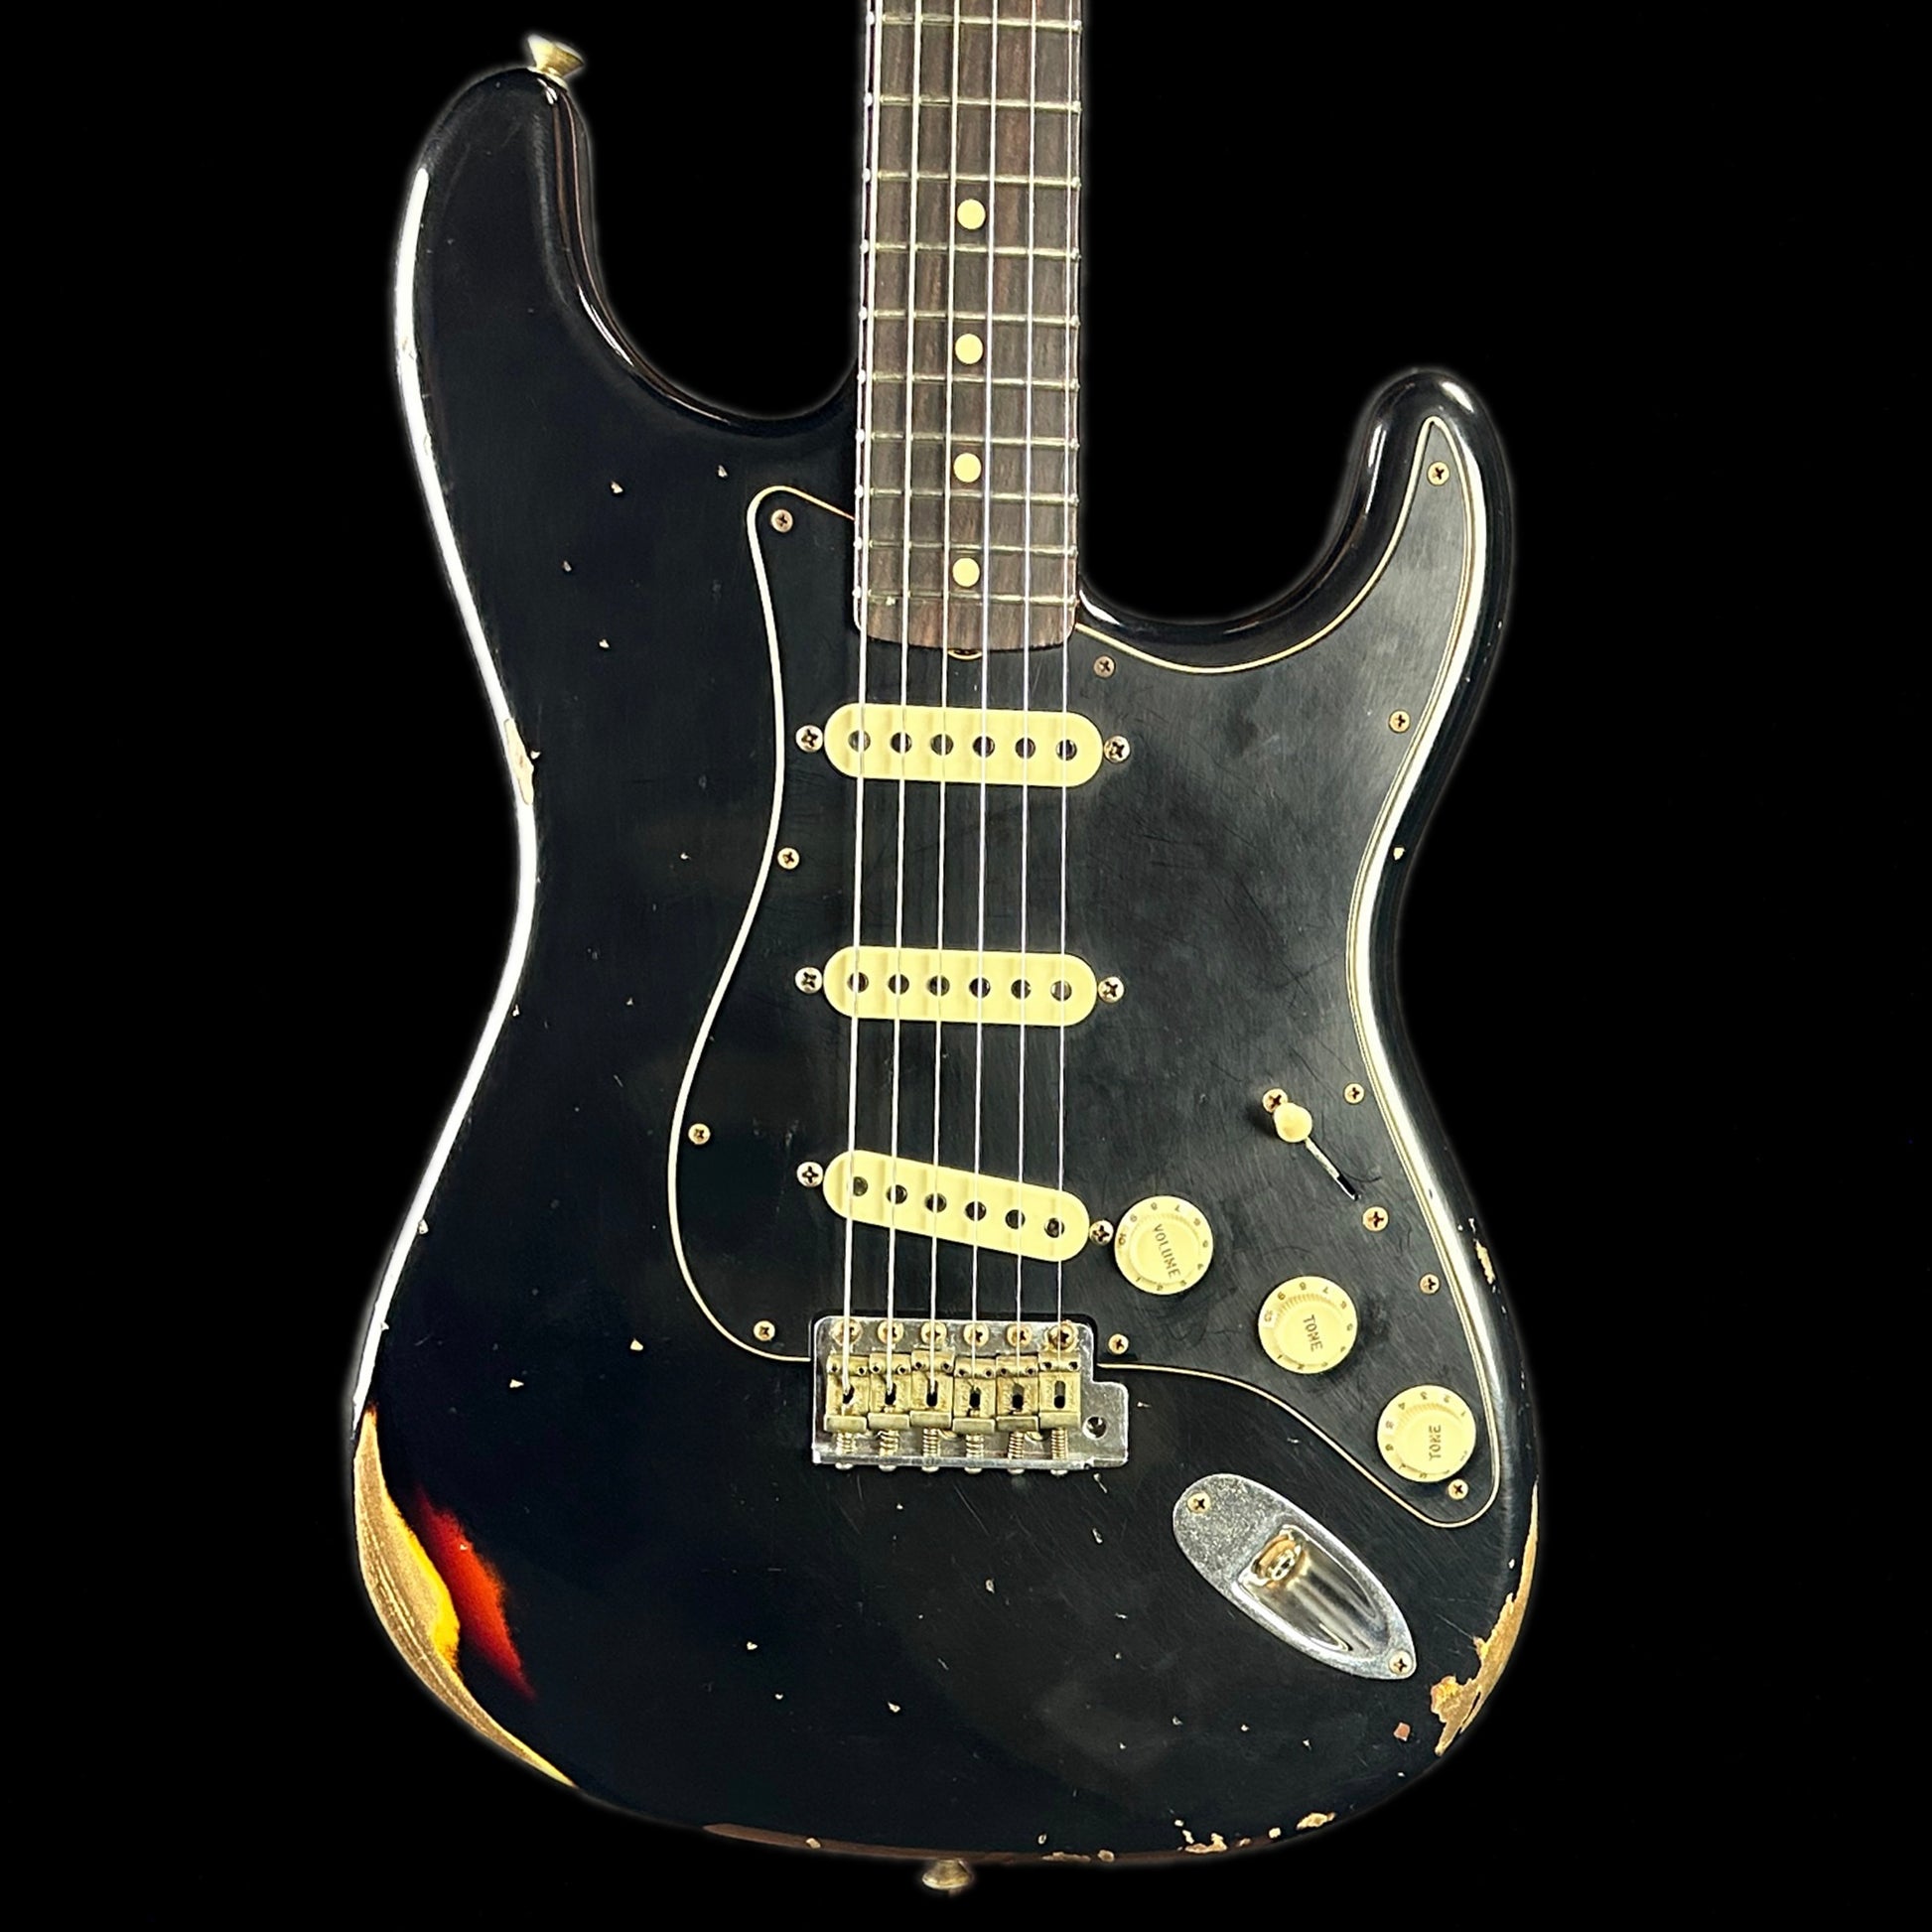 Front of body of Used Fender Dual Mag Stratocaster.